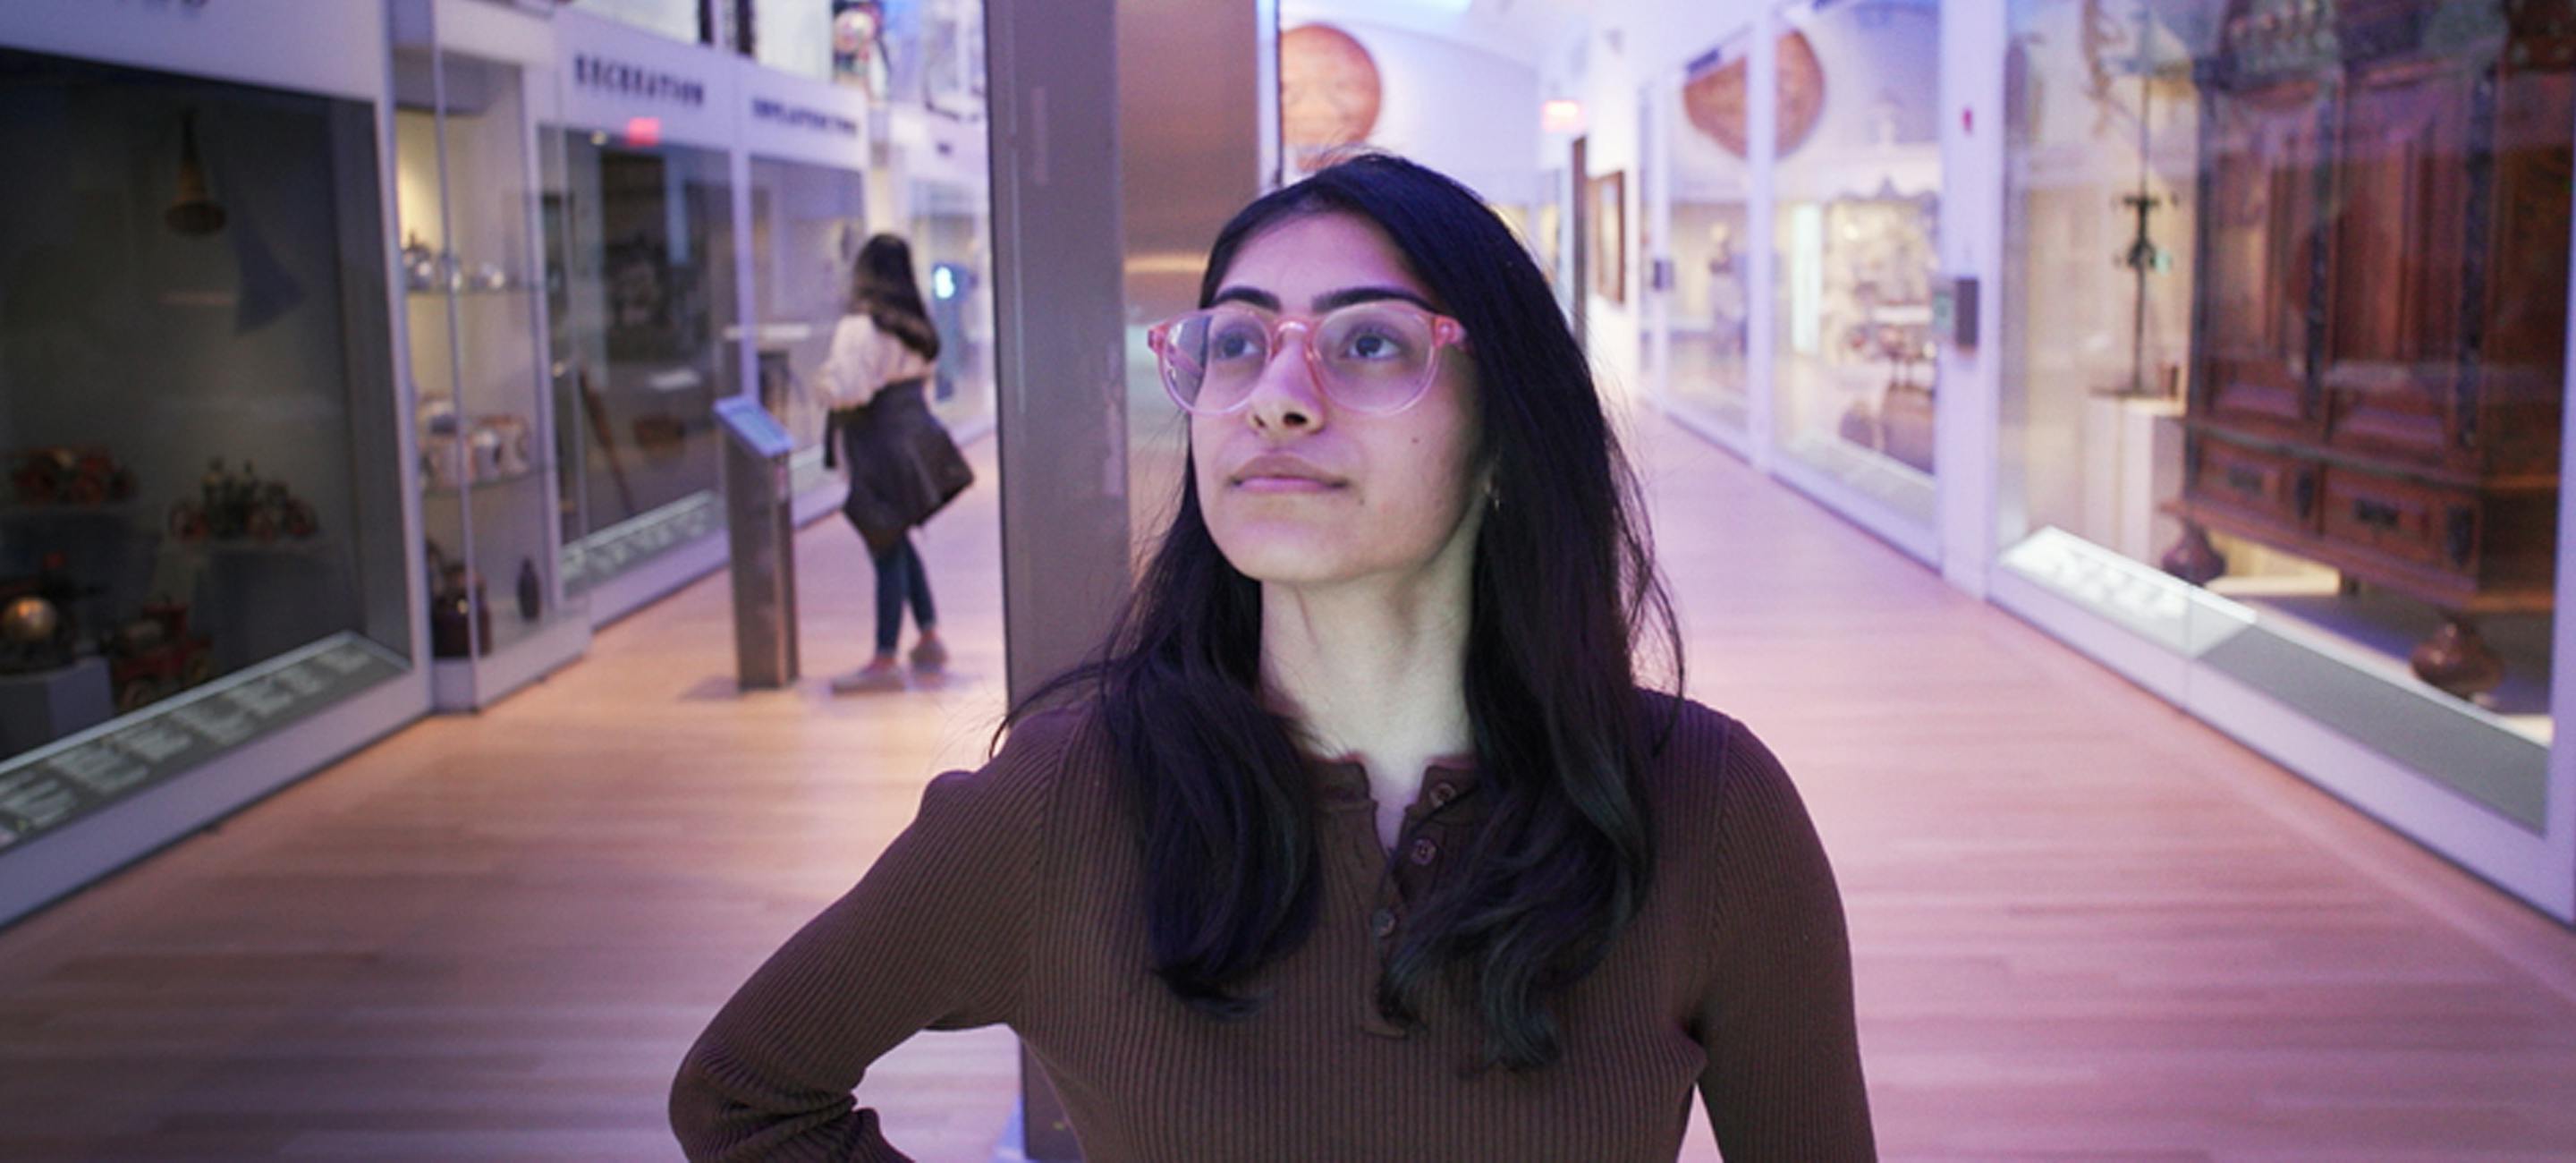 a woman with long dark hair wearing glasses looks at a niche in objects tell stories